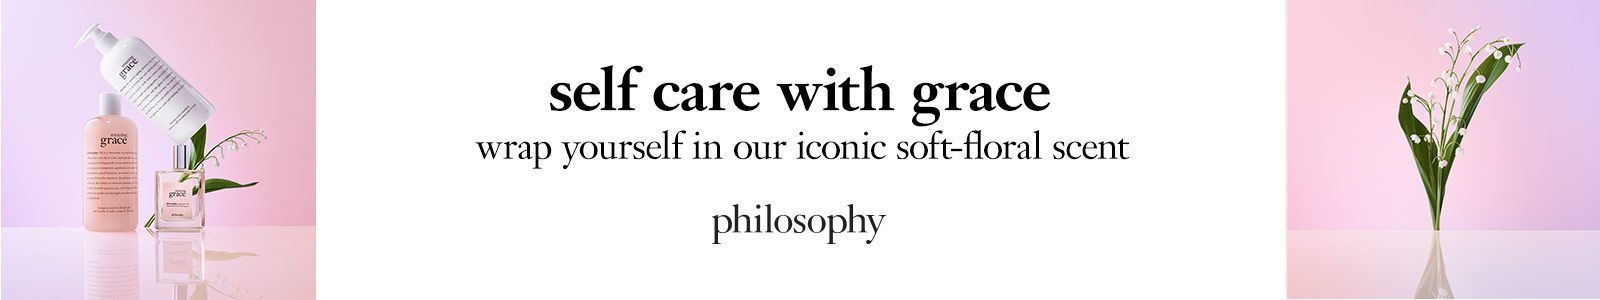 Self care with grace, wrap yourself in our iconic soft-floral scent, philosophy 